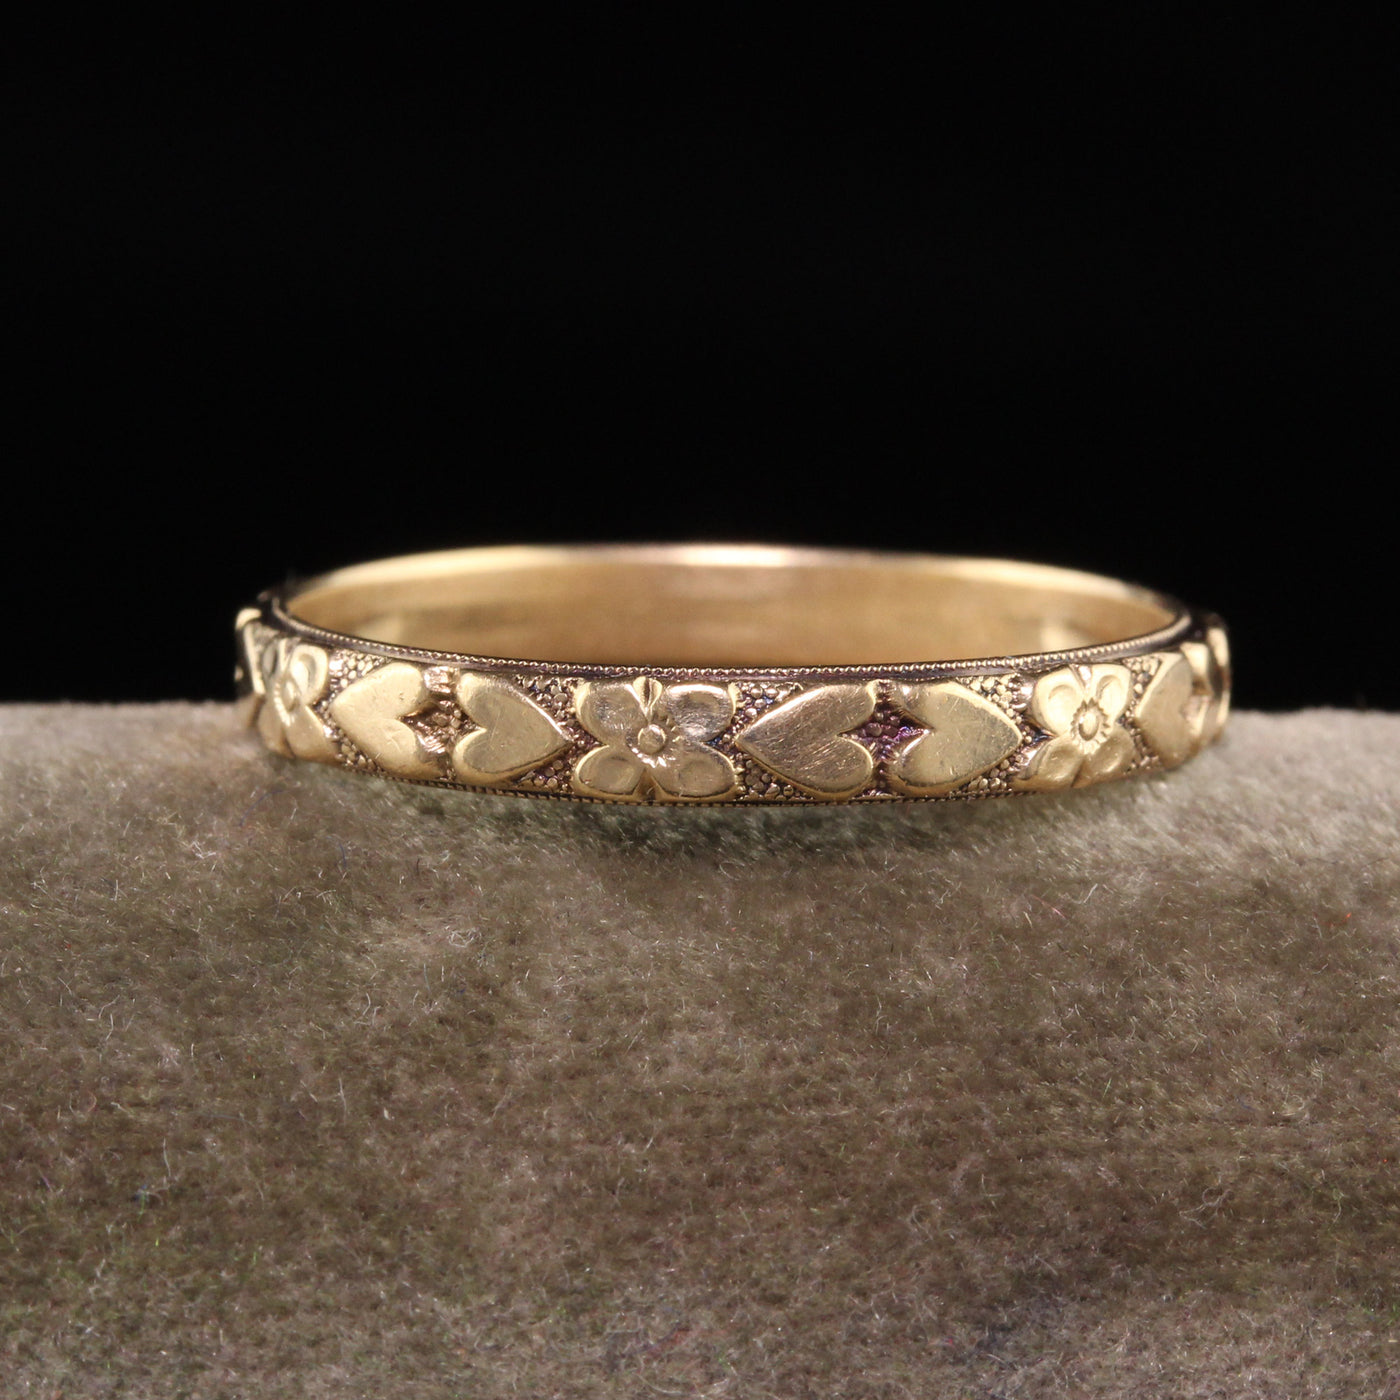 Antique Art Deco 14K Yellow Gold Heart Engraved Wedding Band - Size 11 1/4